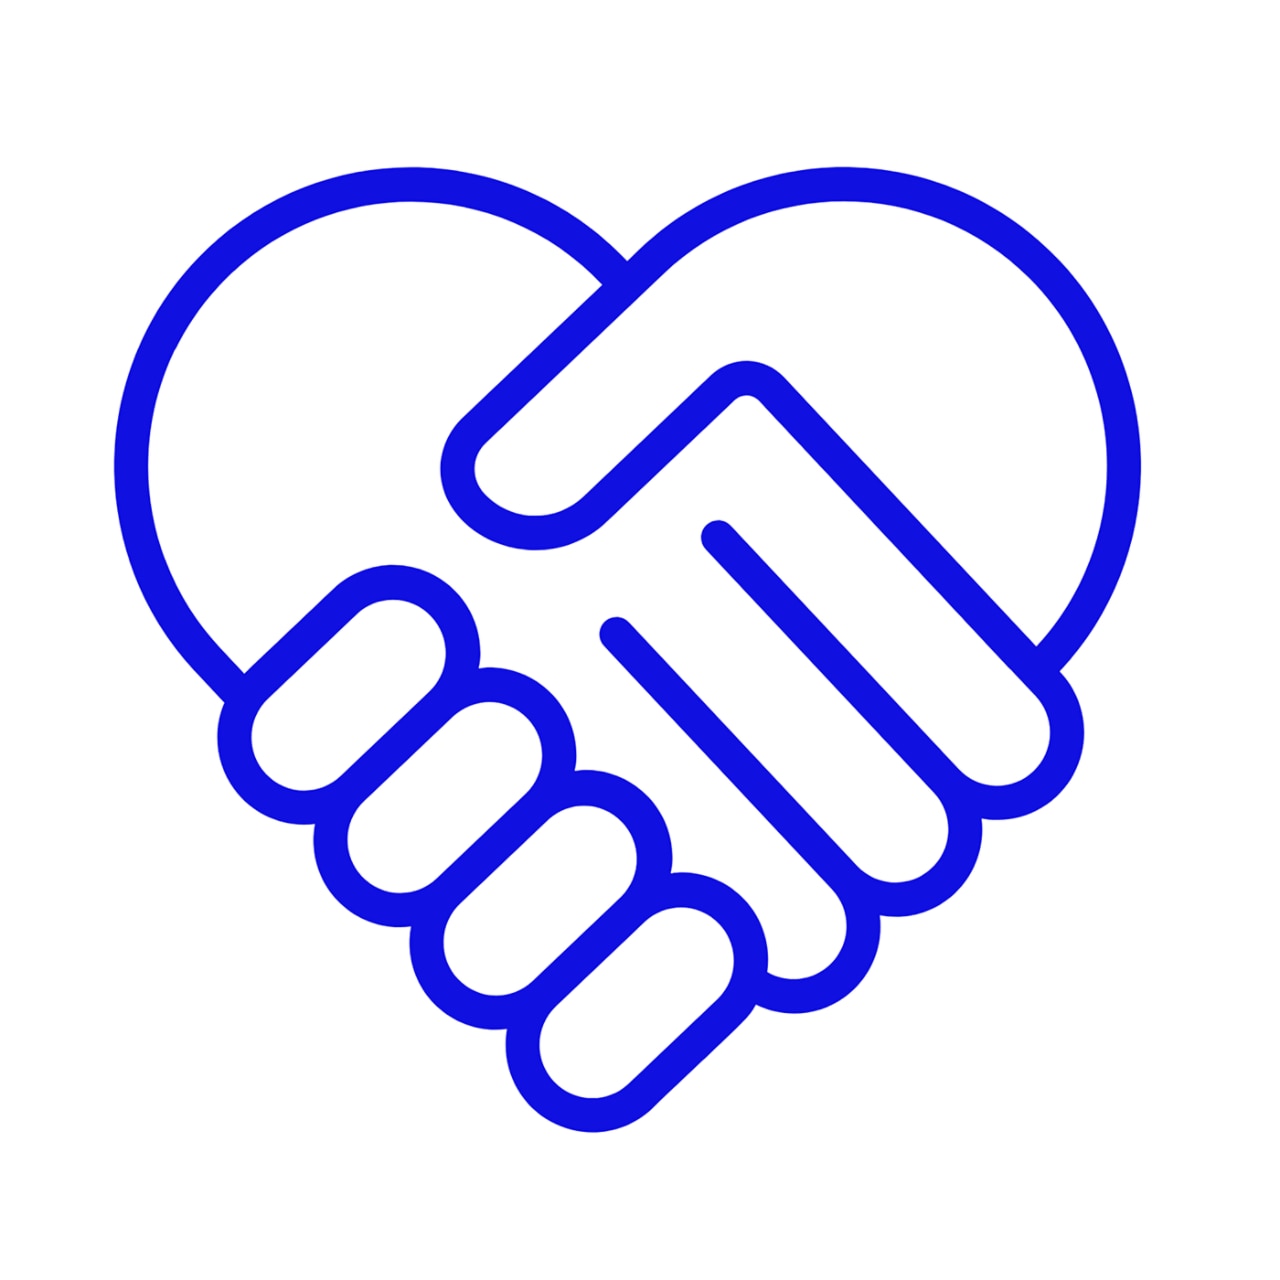 Illustrated heart from two hands shaking icon